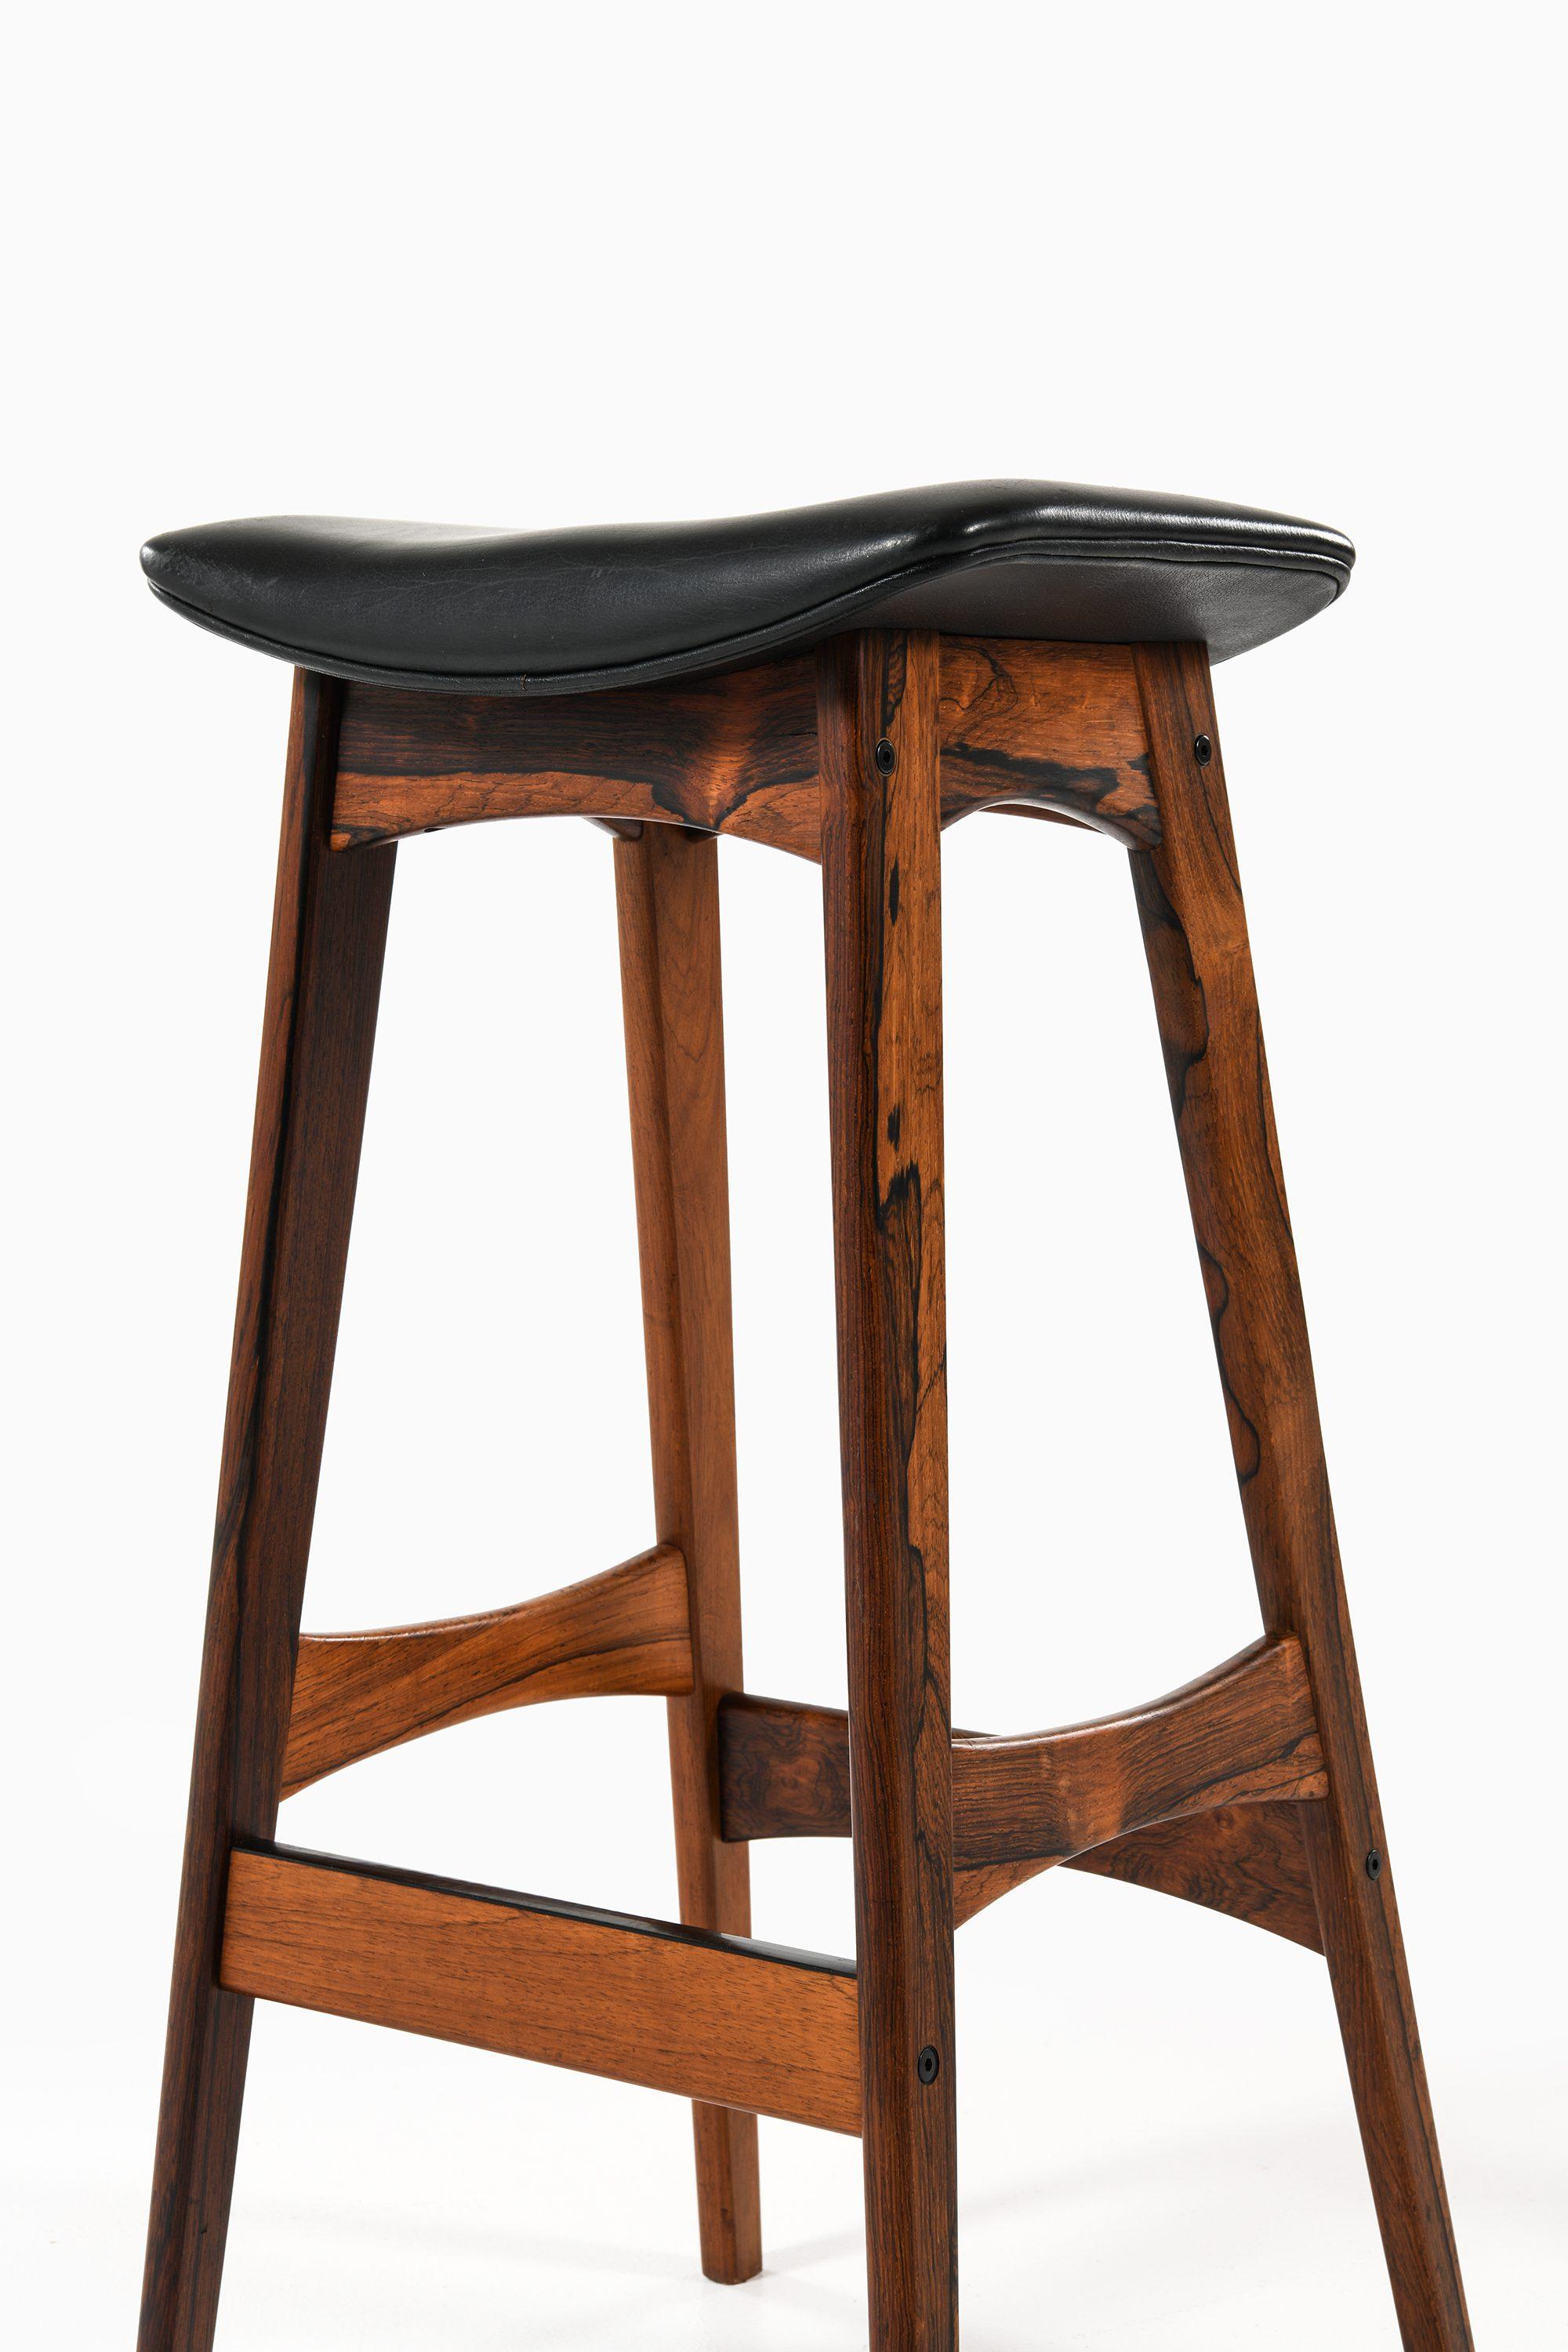 Set of 3 Bar Stools in Rosewood and Black Original Leather by Johannes Andersen, 1961

Additional Information:
Material: Rosewood and black original leather
Style: Mid century, Scandinavian
Produced by Brdr. Andersens Møbelfabrik A/S
Dimensions (W x